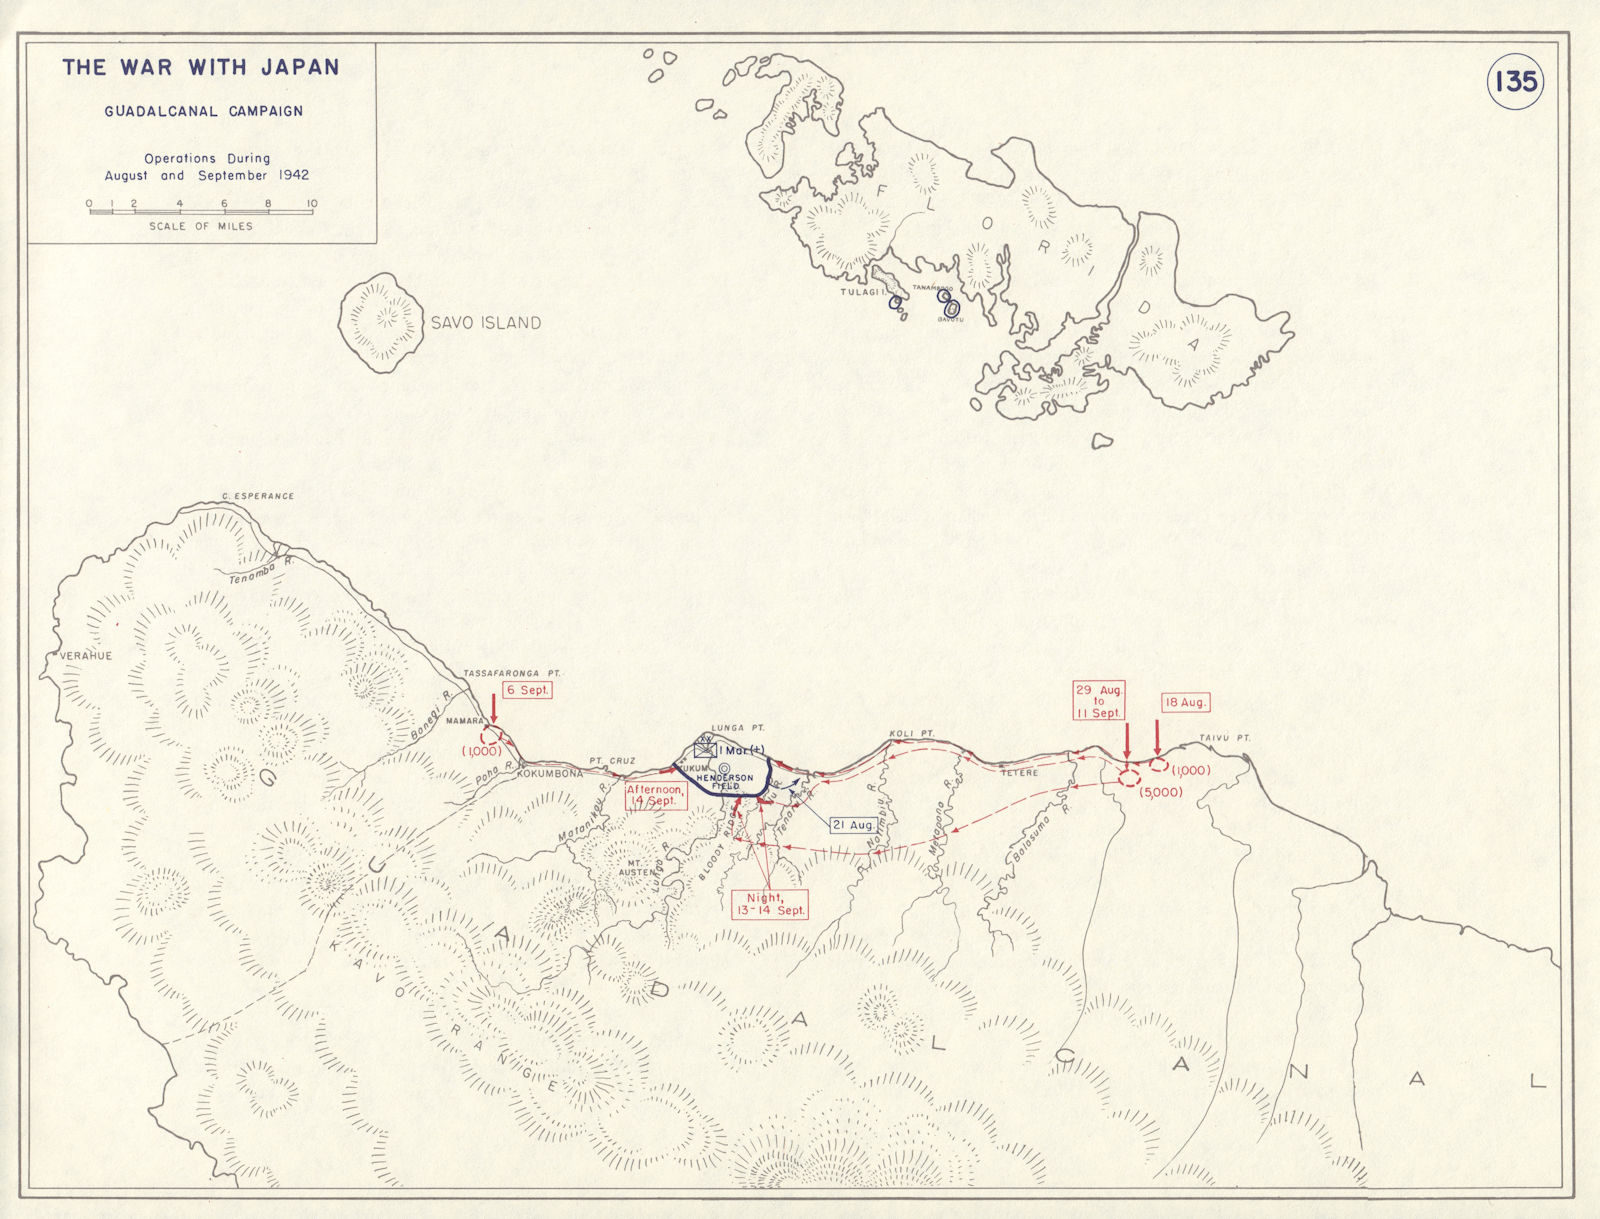 World War 2. Guadalcanal Campaign. August & September 1942 Operations 1959 map